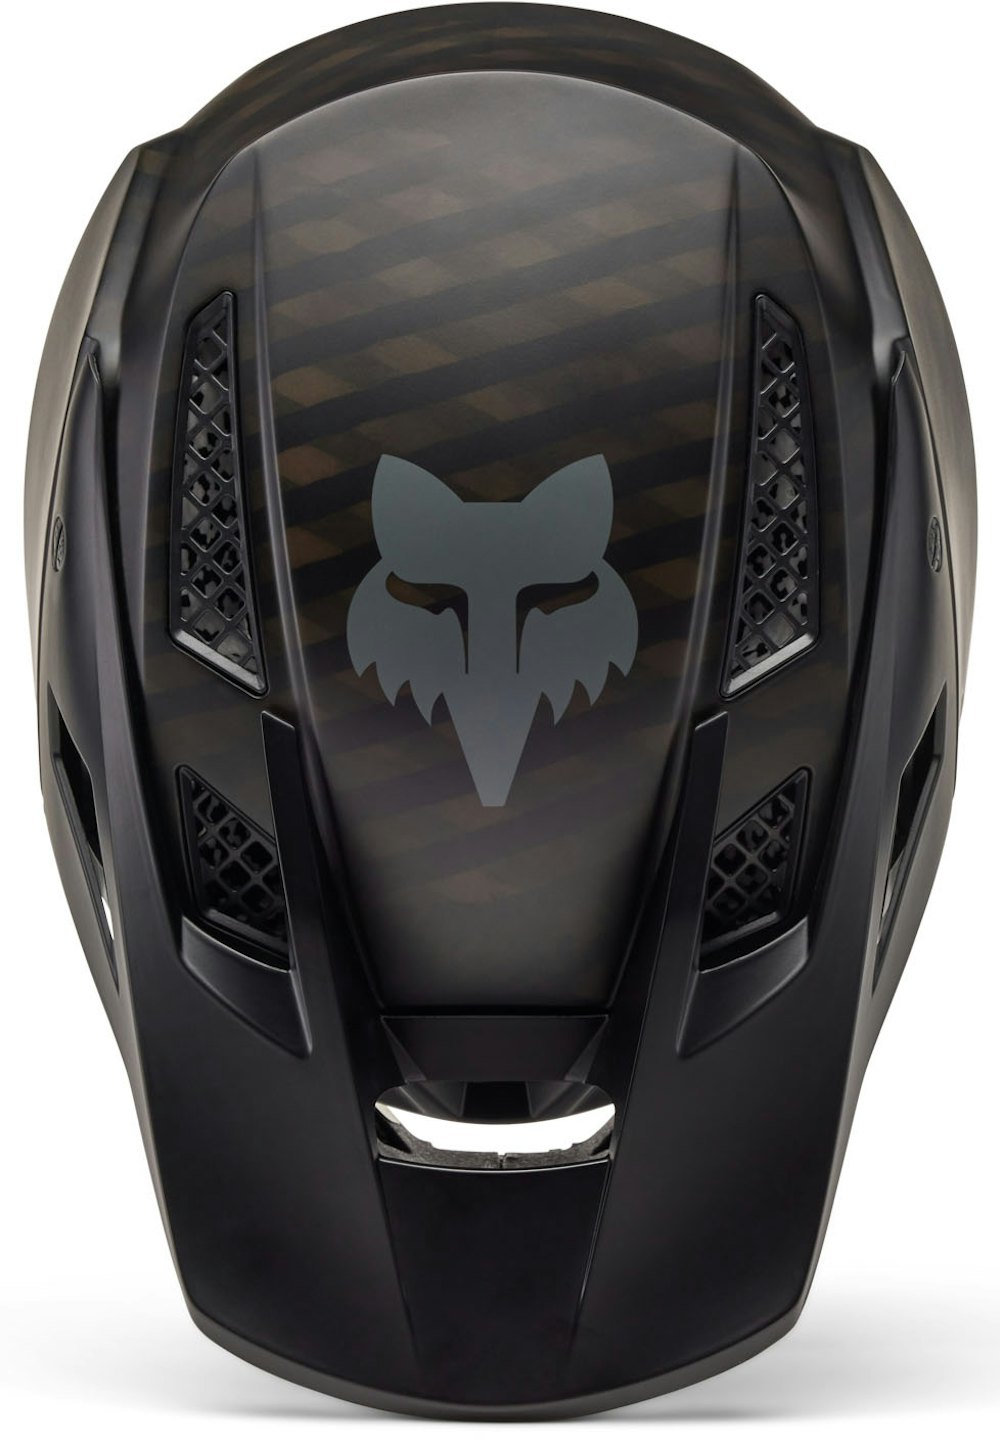 FOX Rampage Pro Carbon MIPS CE/CPSC